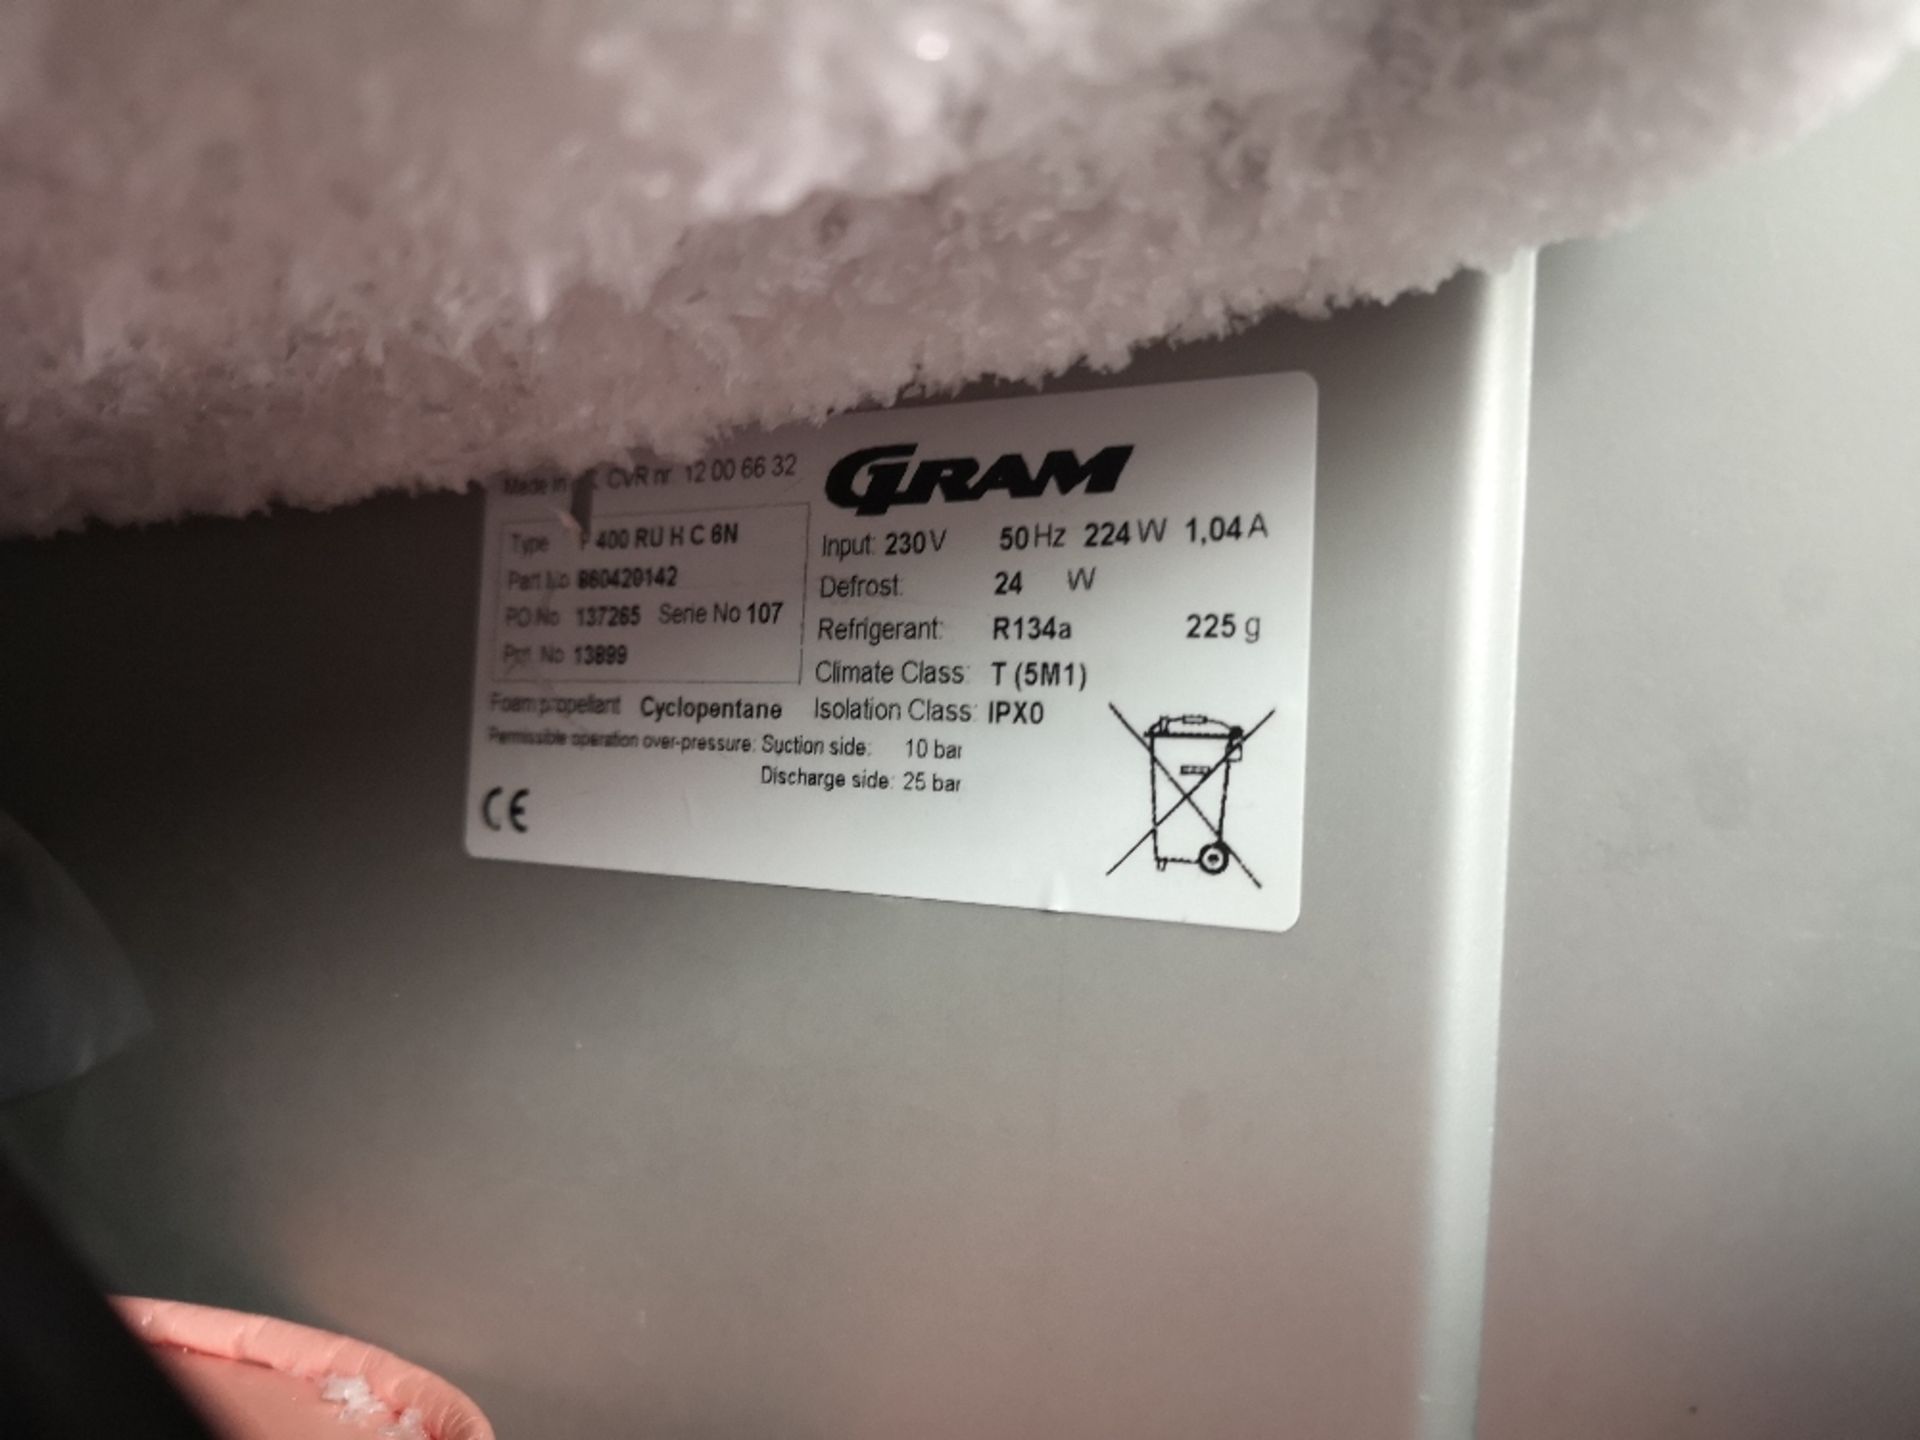 Gram F400 Upright Stainless Steel Freezer - Image 2 of 2